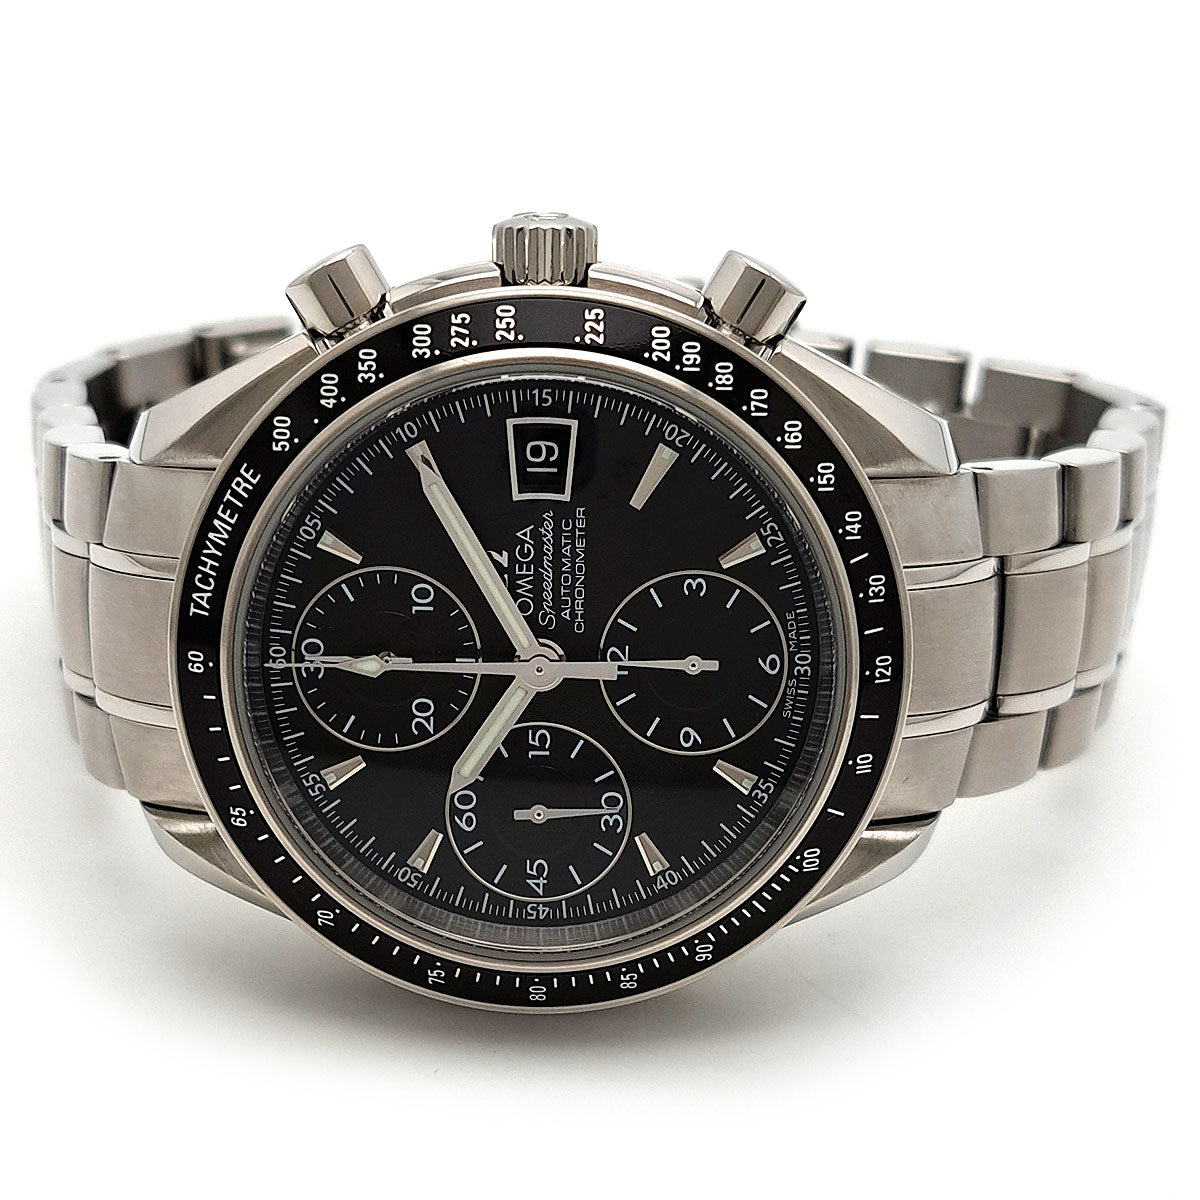 OMEGA Speedmaster Date Chronograph 3210.50 Automatic Stainless Steel Men's Watch 3210.5